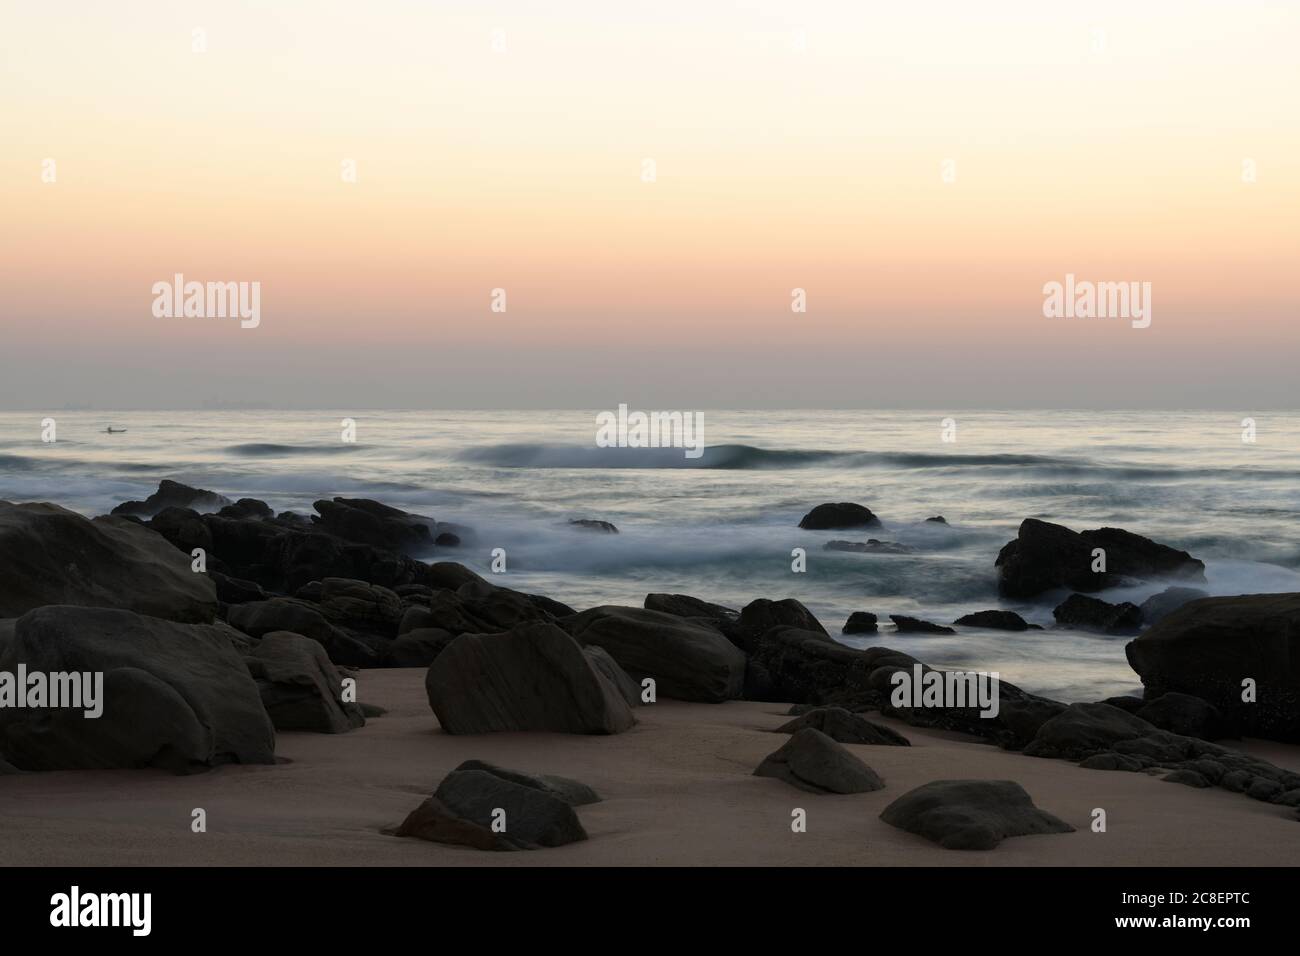 Landscape, beautiful beach at dawn, Durban, South Africa, motion, blur, African seascape, coast, beauty in nature, backgrounds, mood, atmosphere Stock Photo